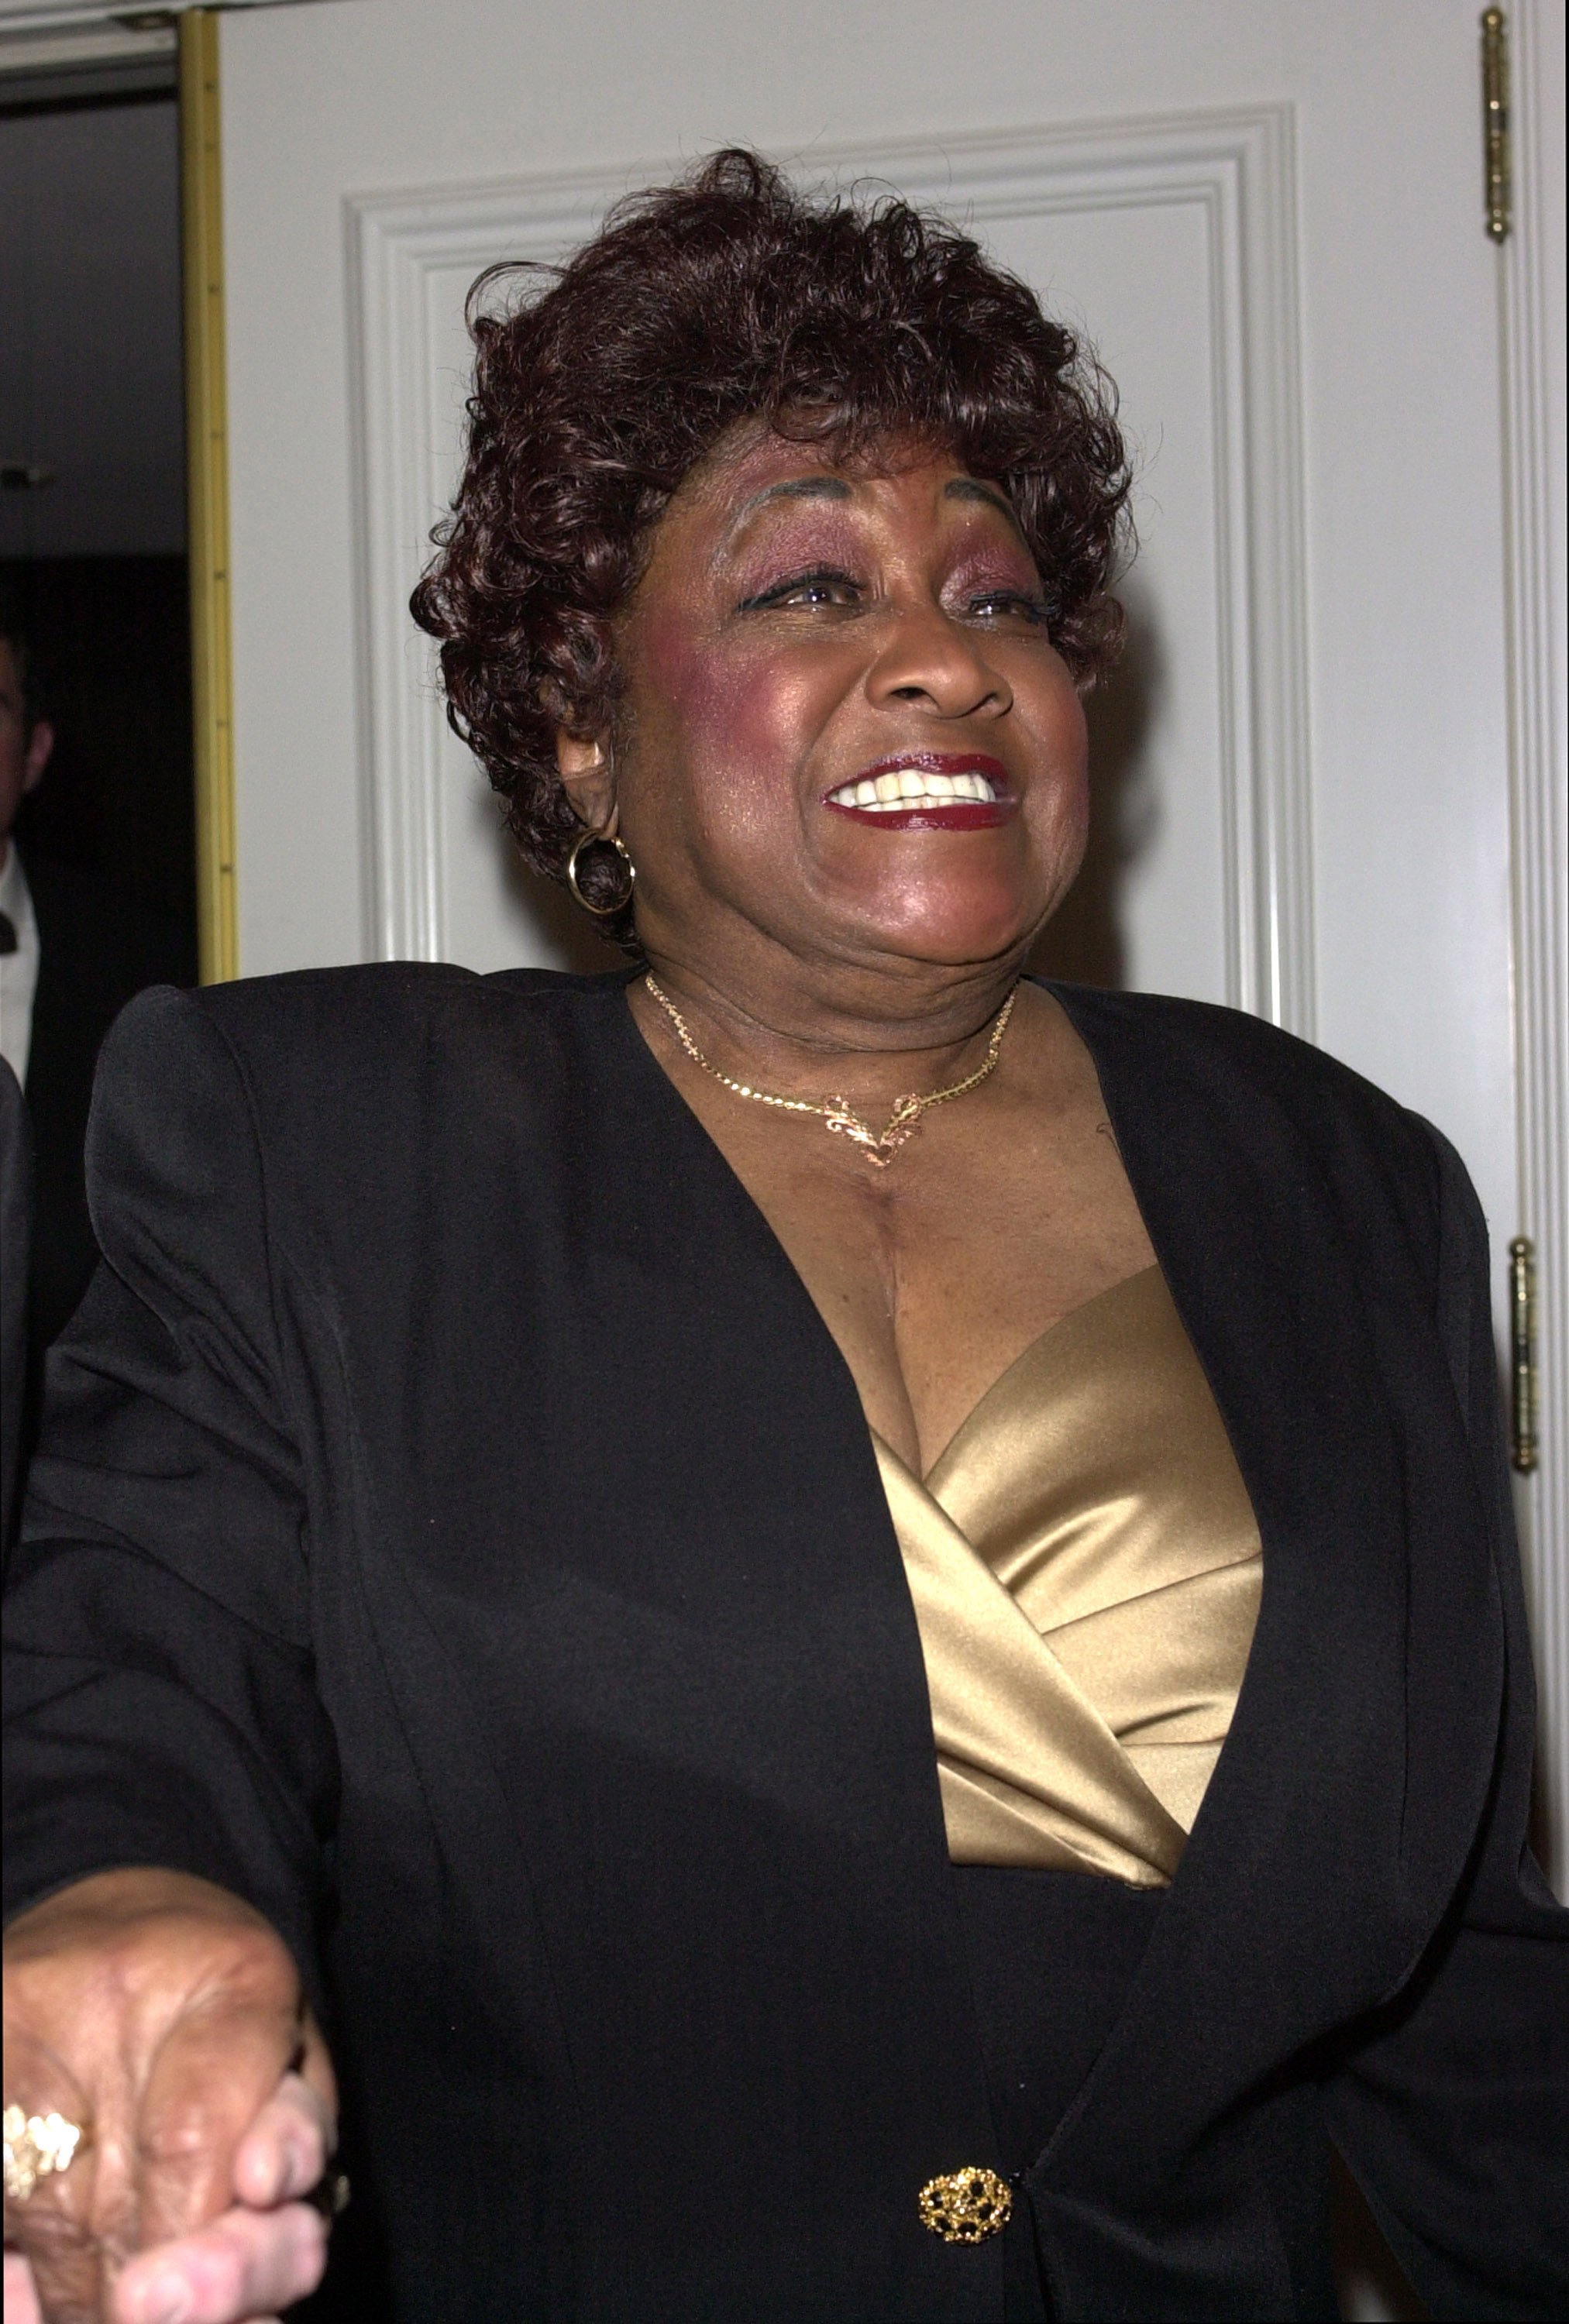 Isabel Sanford during Night of 100 Stars at Beverly Hills Hotel in Beverly Hills, California | Photo: A. Nevader/WireImage via Getty Images